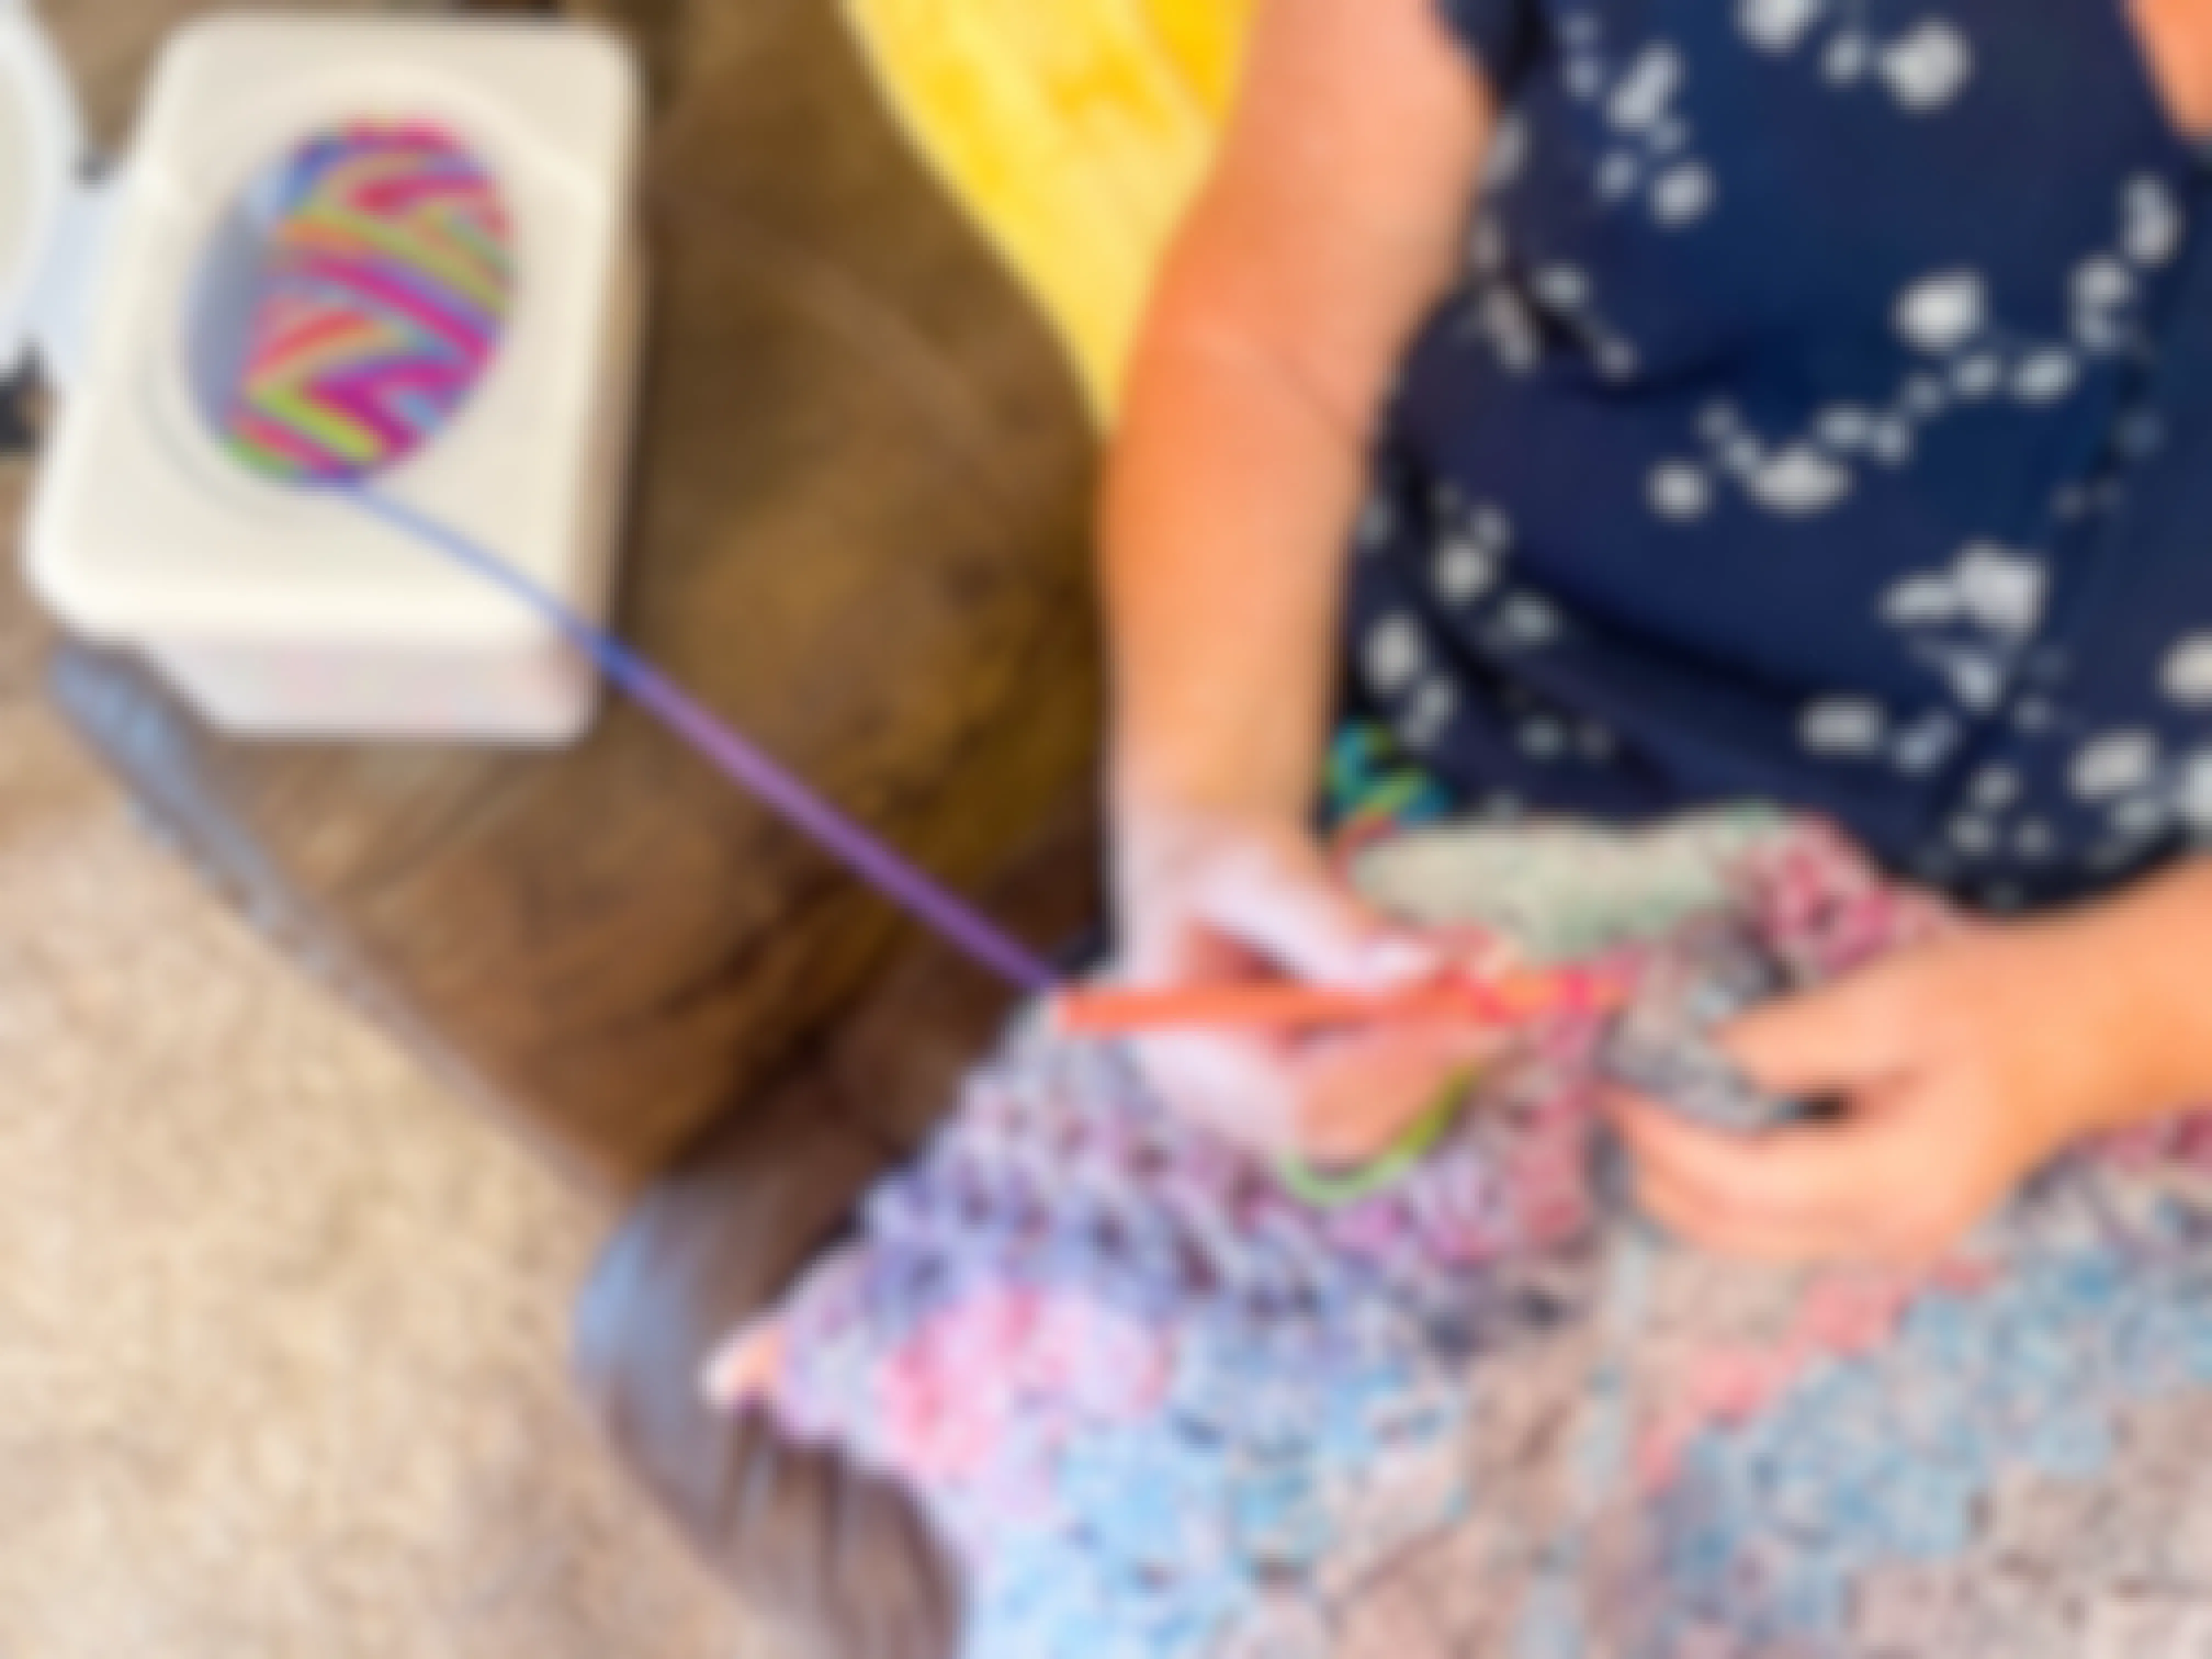 a baby wipe container being reused as a yarn holder with a woman croceting 